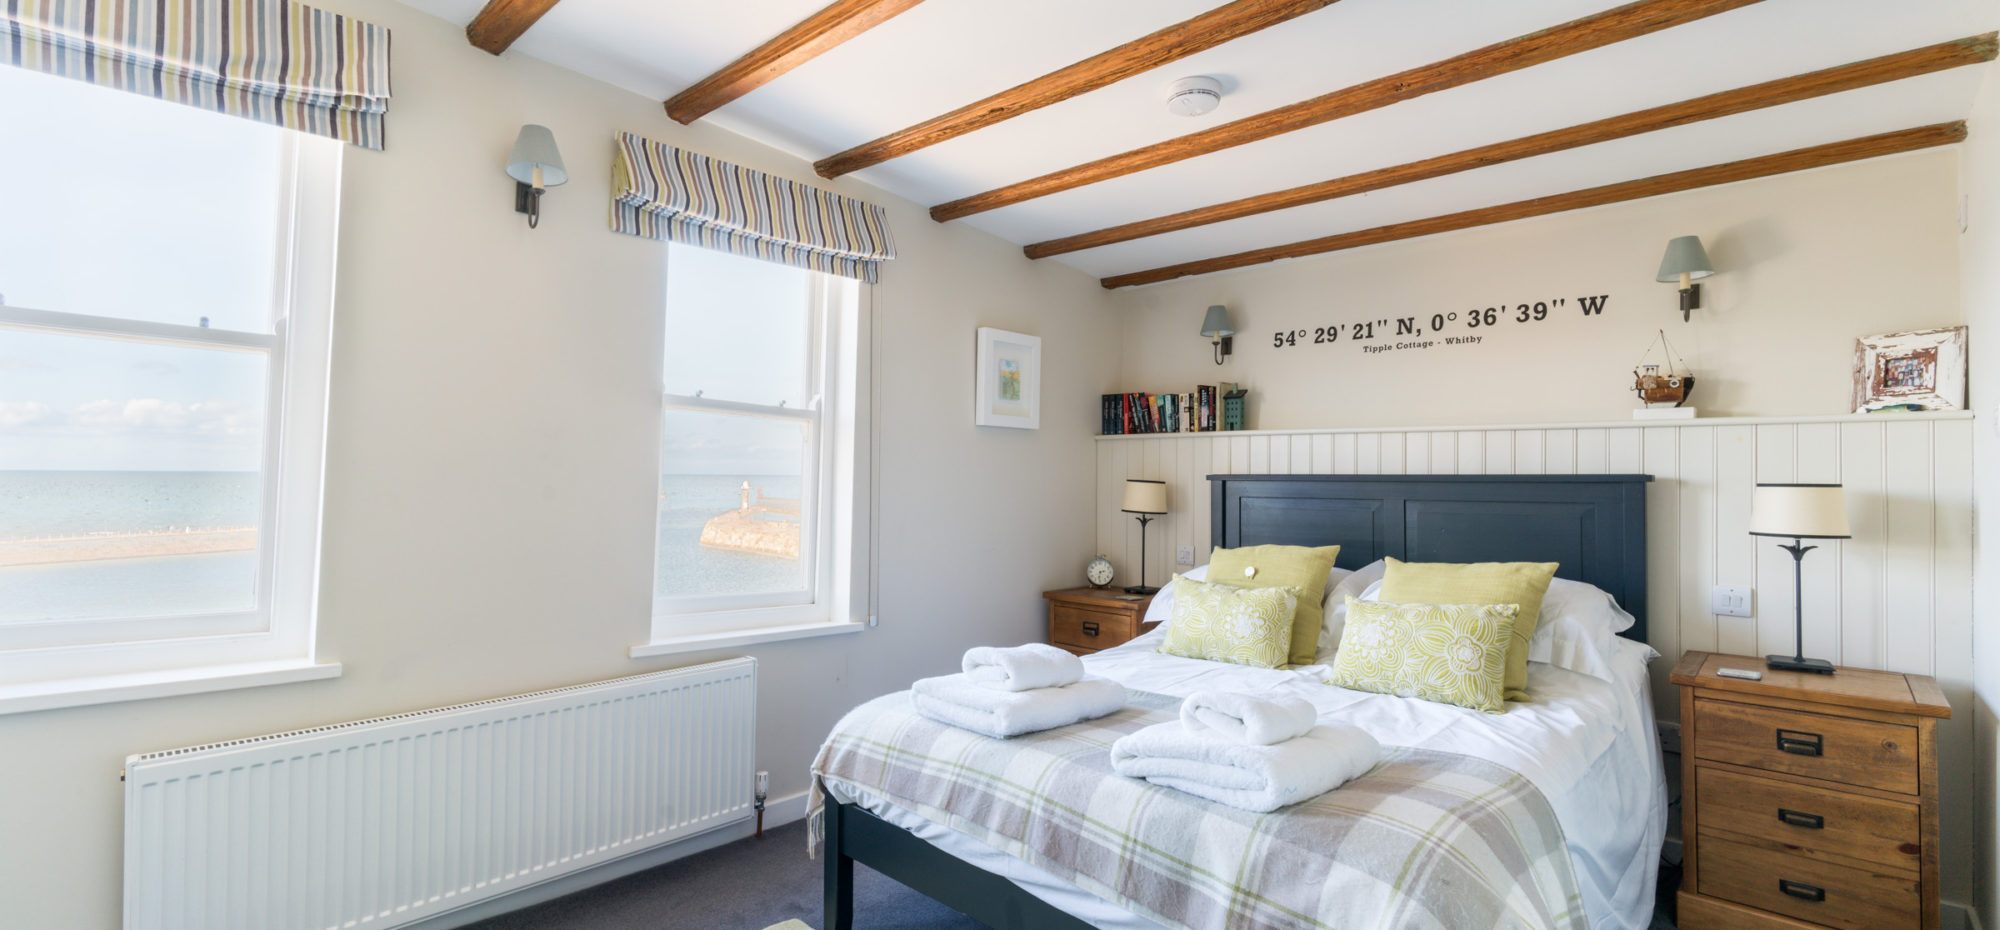 Tipple Cottage Whitby - Master double bedroom